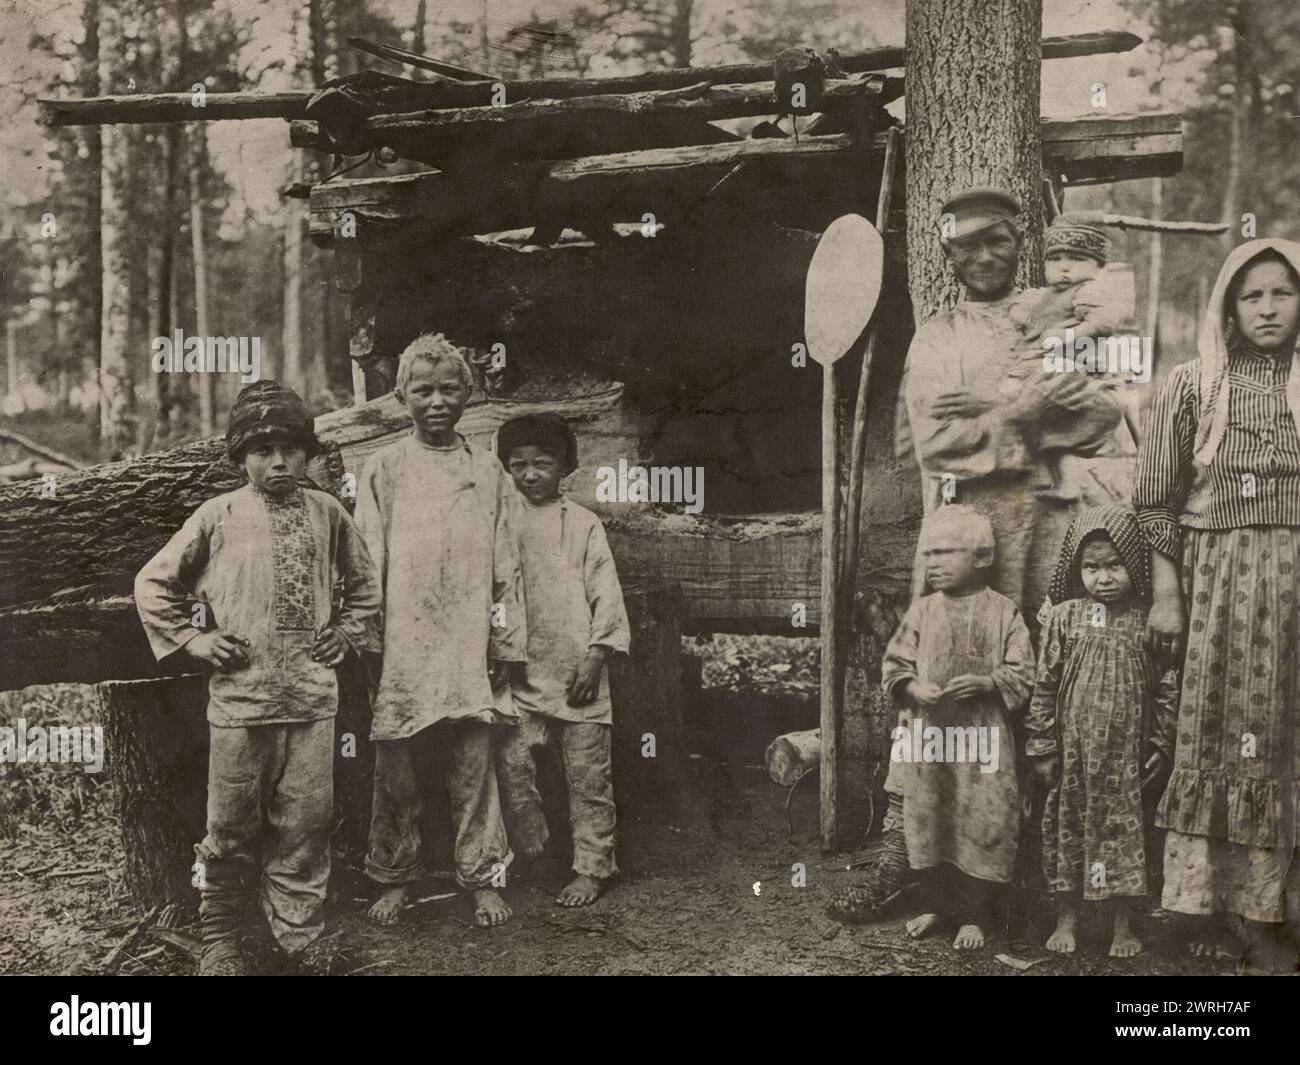 Settlers at their home, 1880. This collection includes more than four hundred photographs of daily life in Yenisei Province in the late tsarist period. Photographs include peasants, Cossacks, and high-ranking officials. Stock Photo